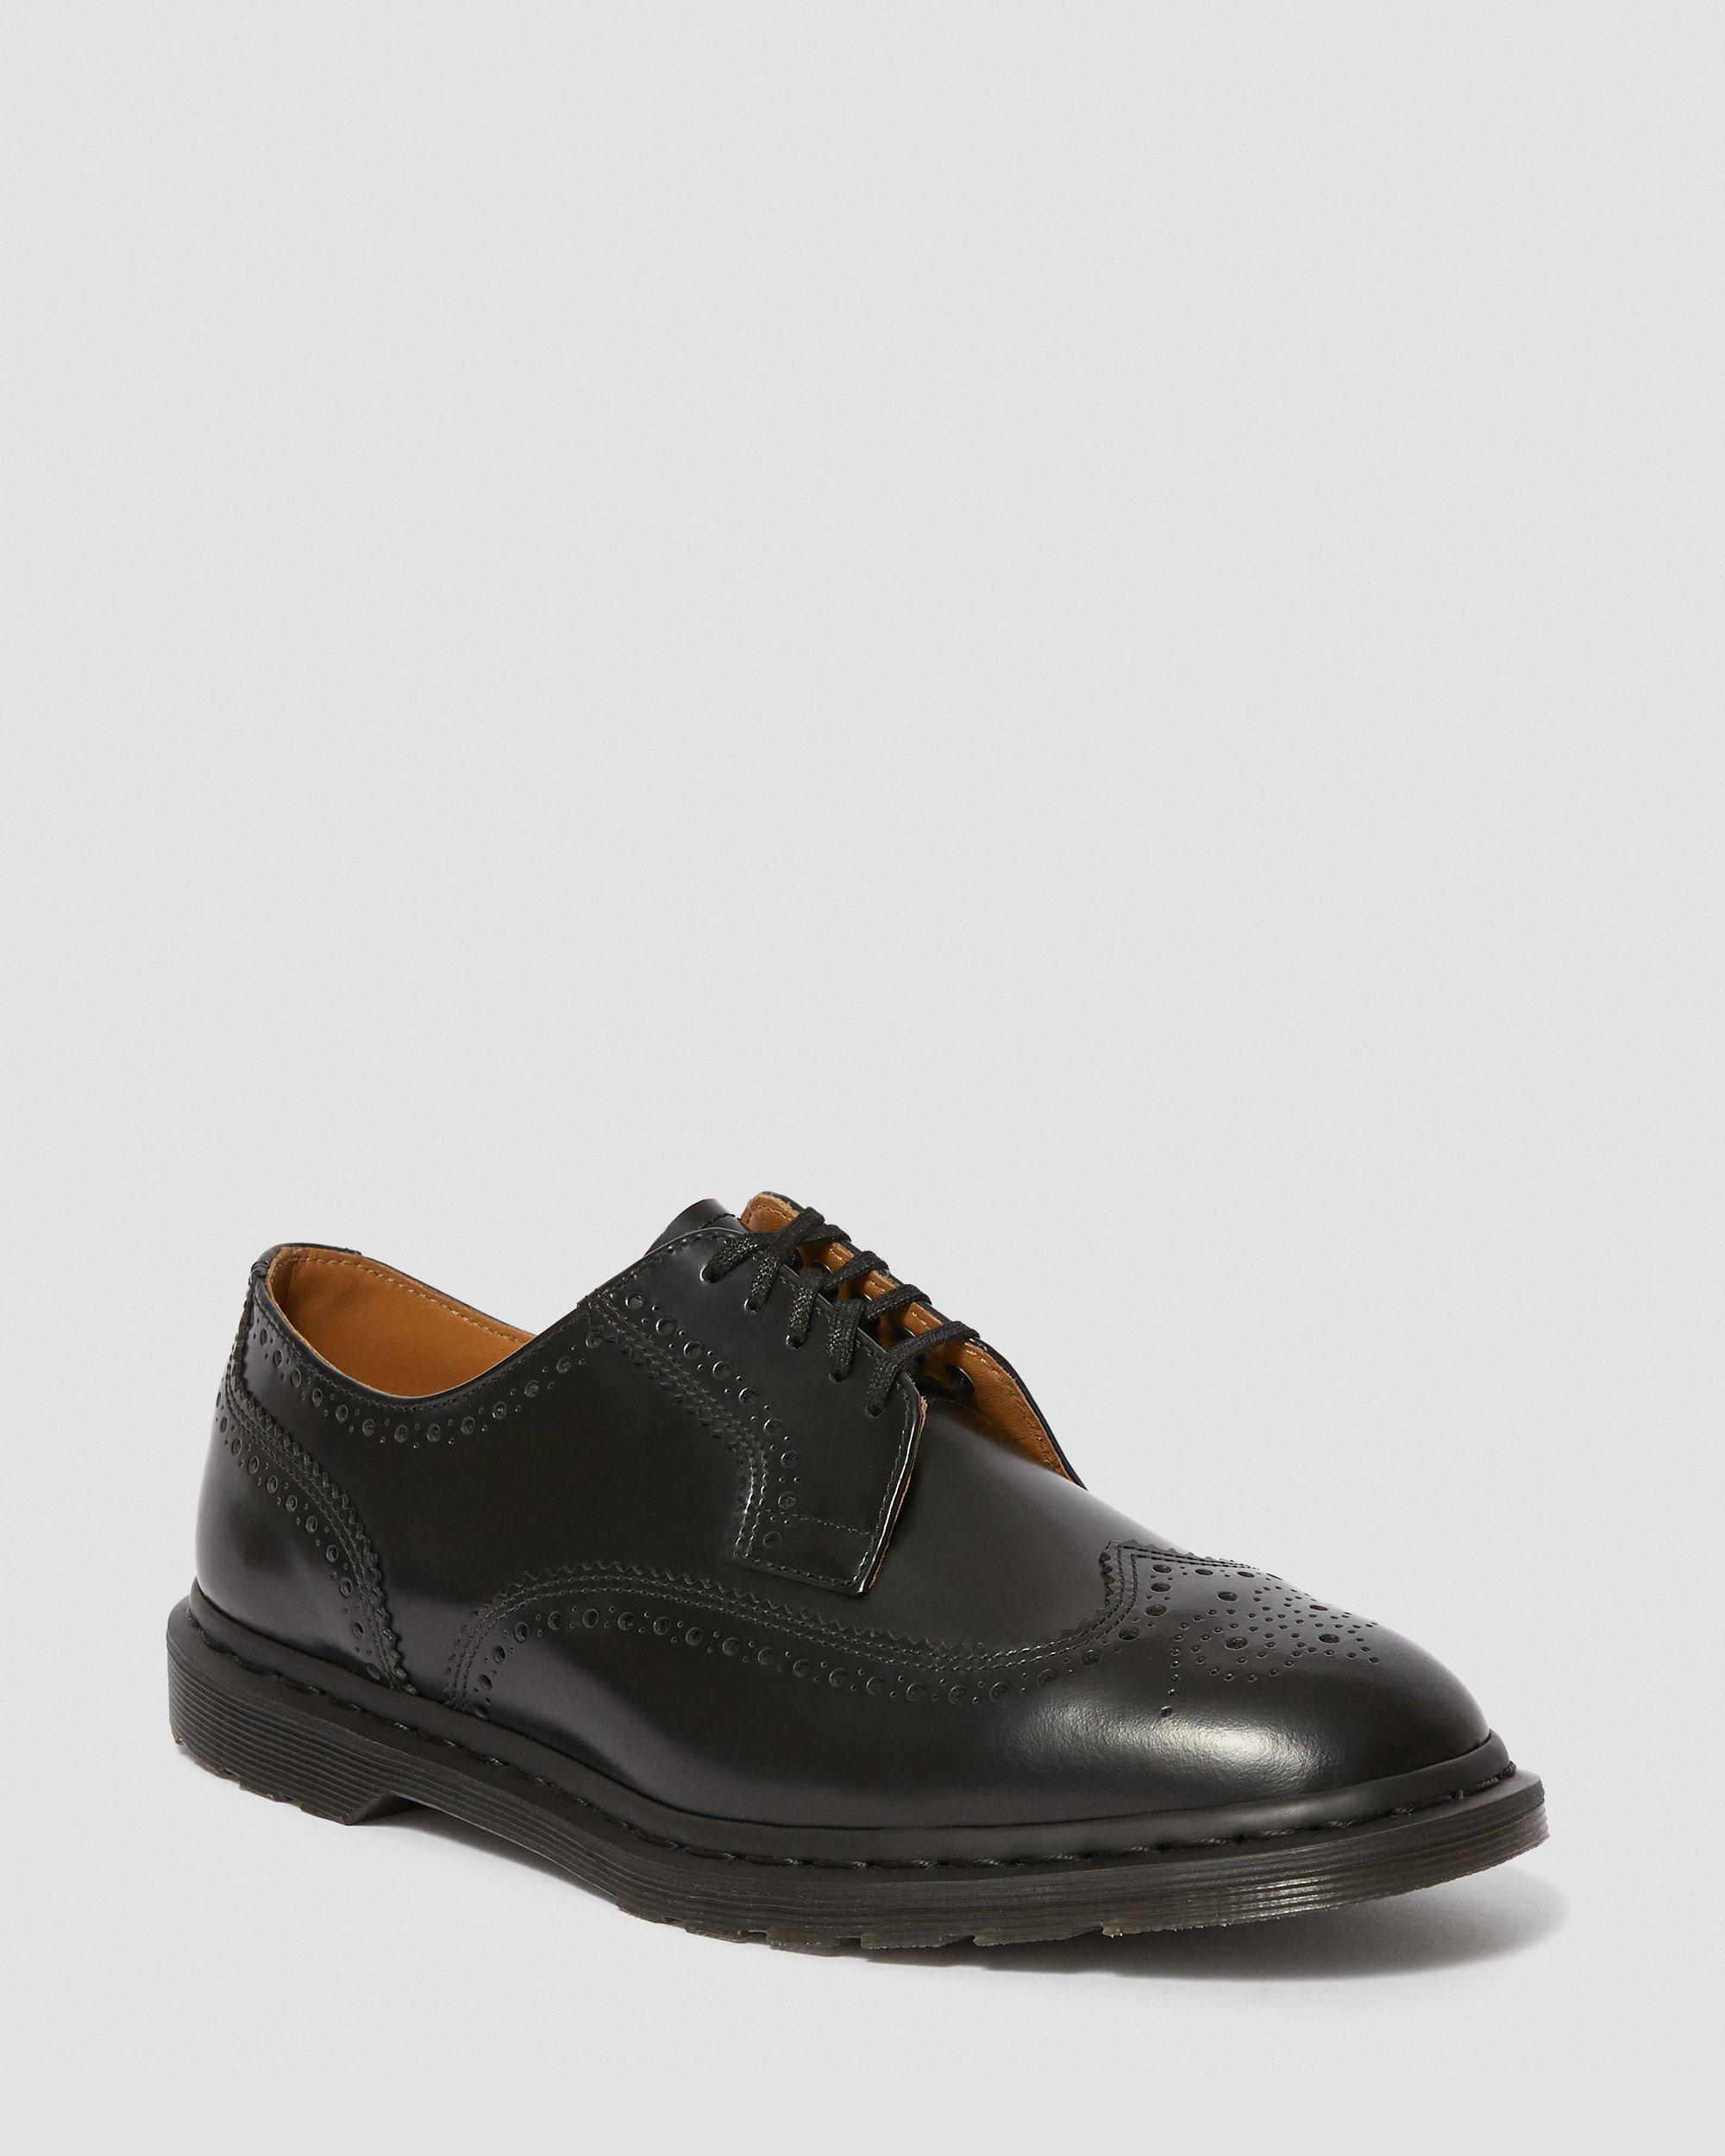 Kelvin II Smooth Leather Brogue Shoes in Black | Dr. Martens